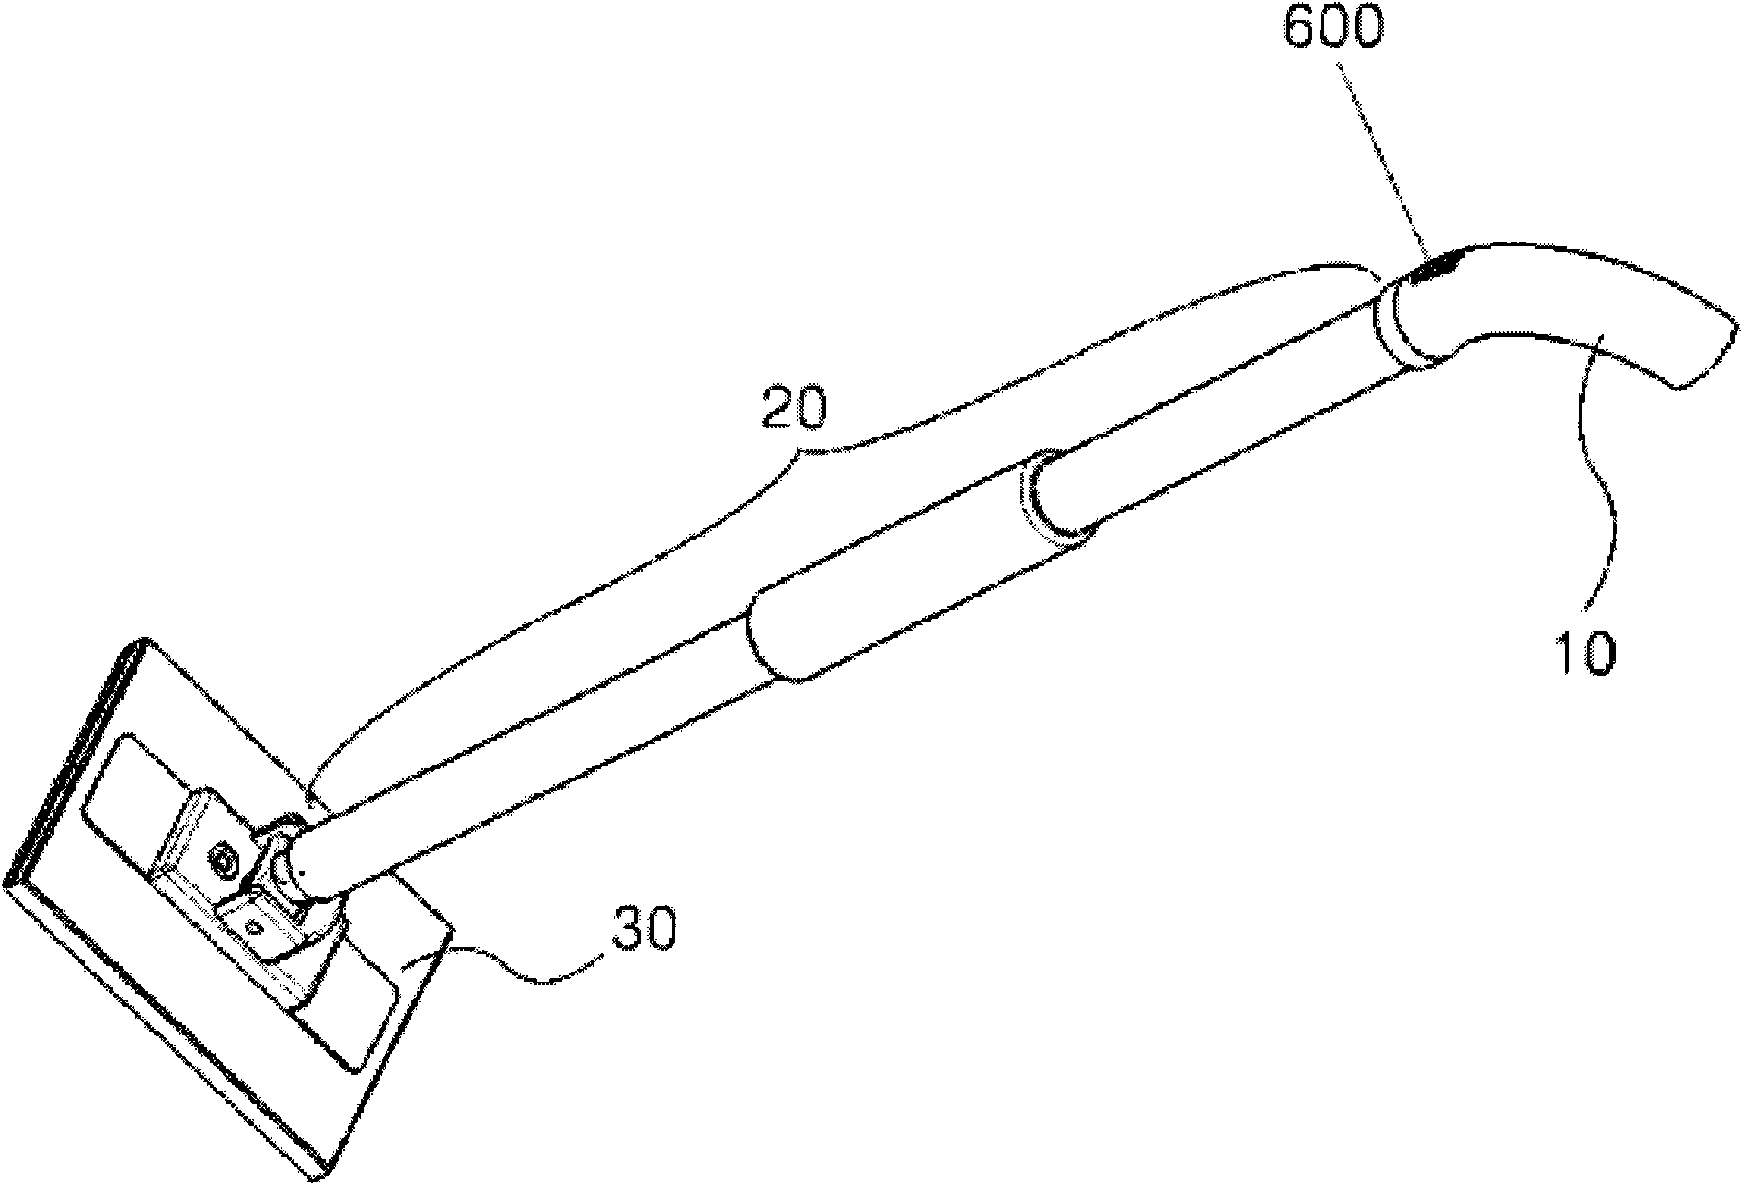 Apparatus for cleaning floor